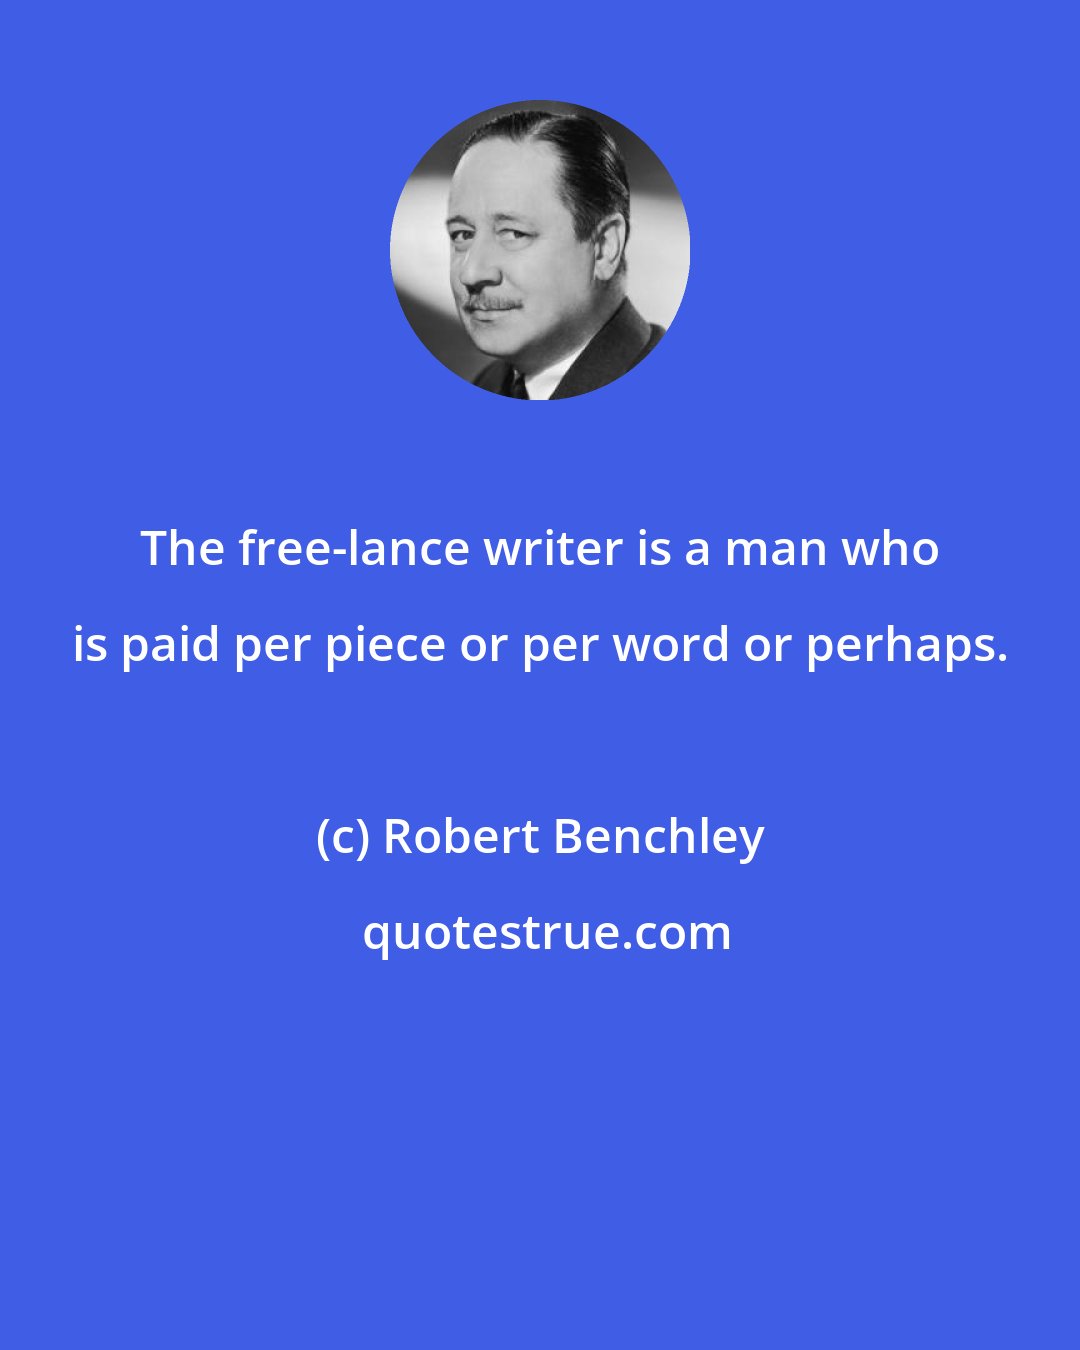 Robert Benchley: The free-lance writer is a man who is paid per piece or per word or perhaps.